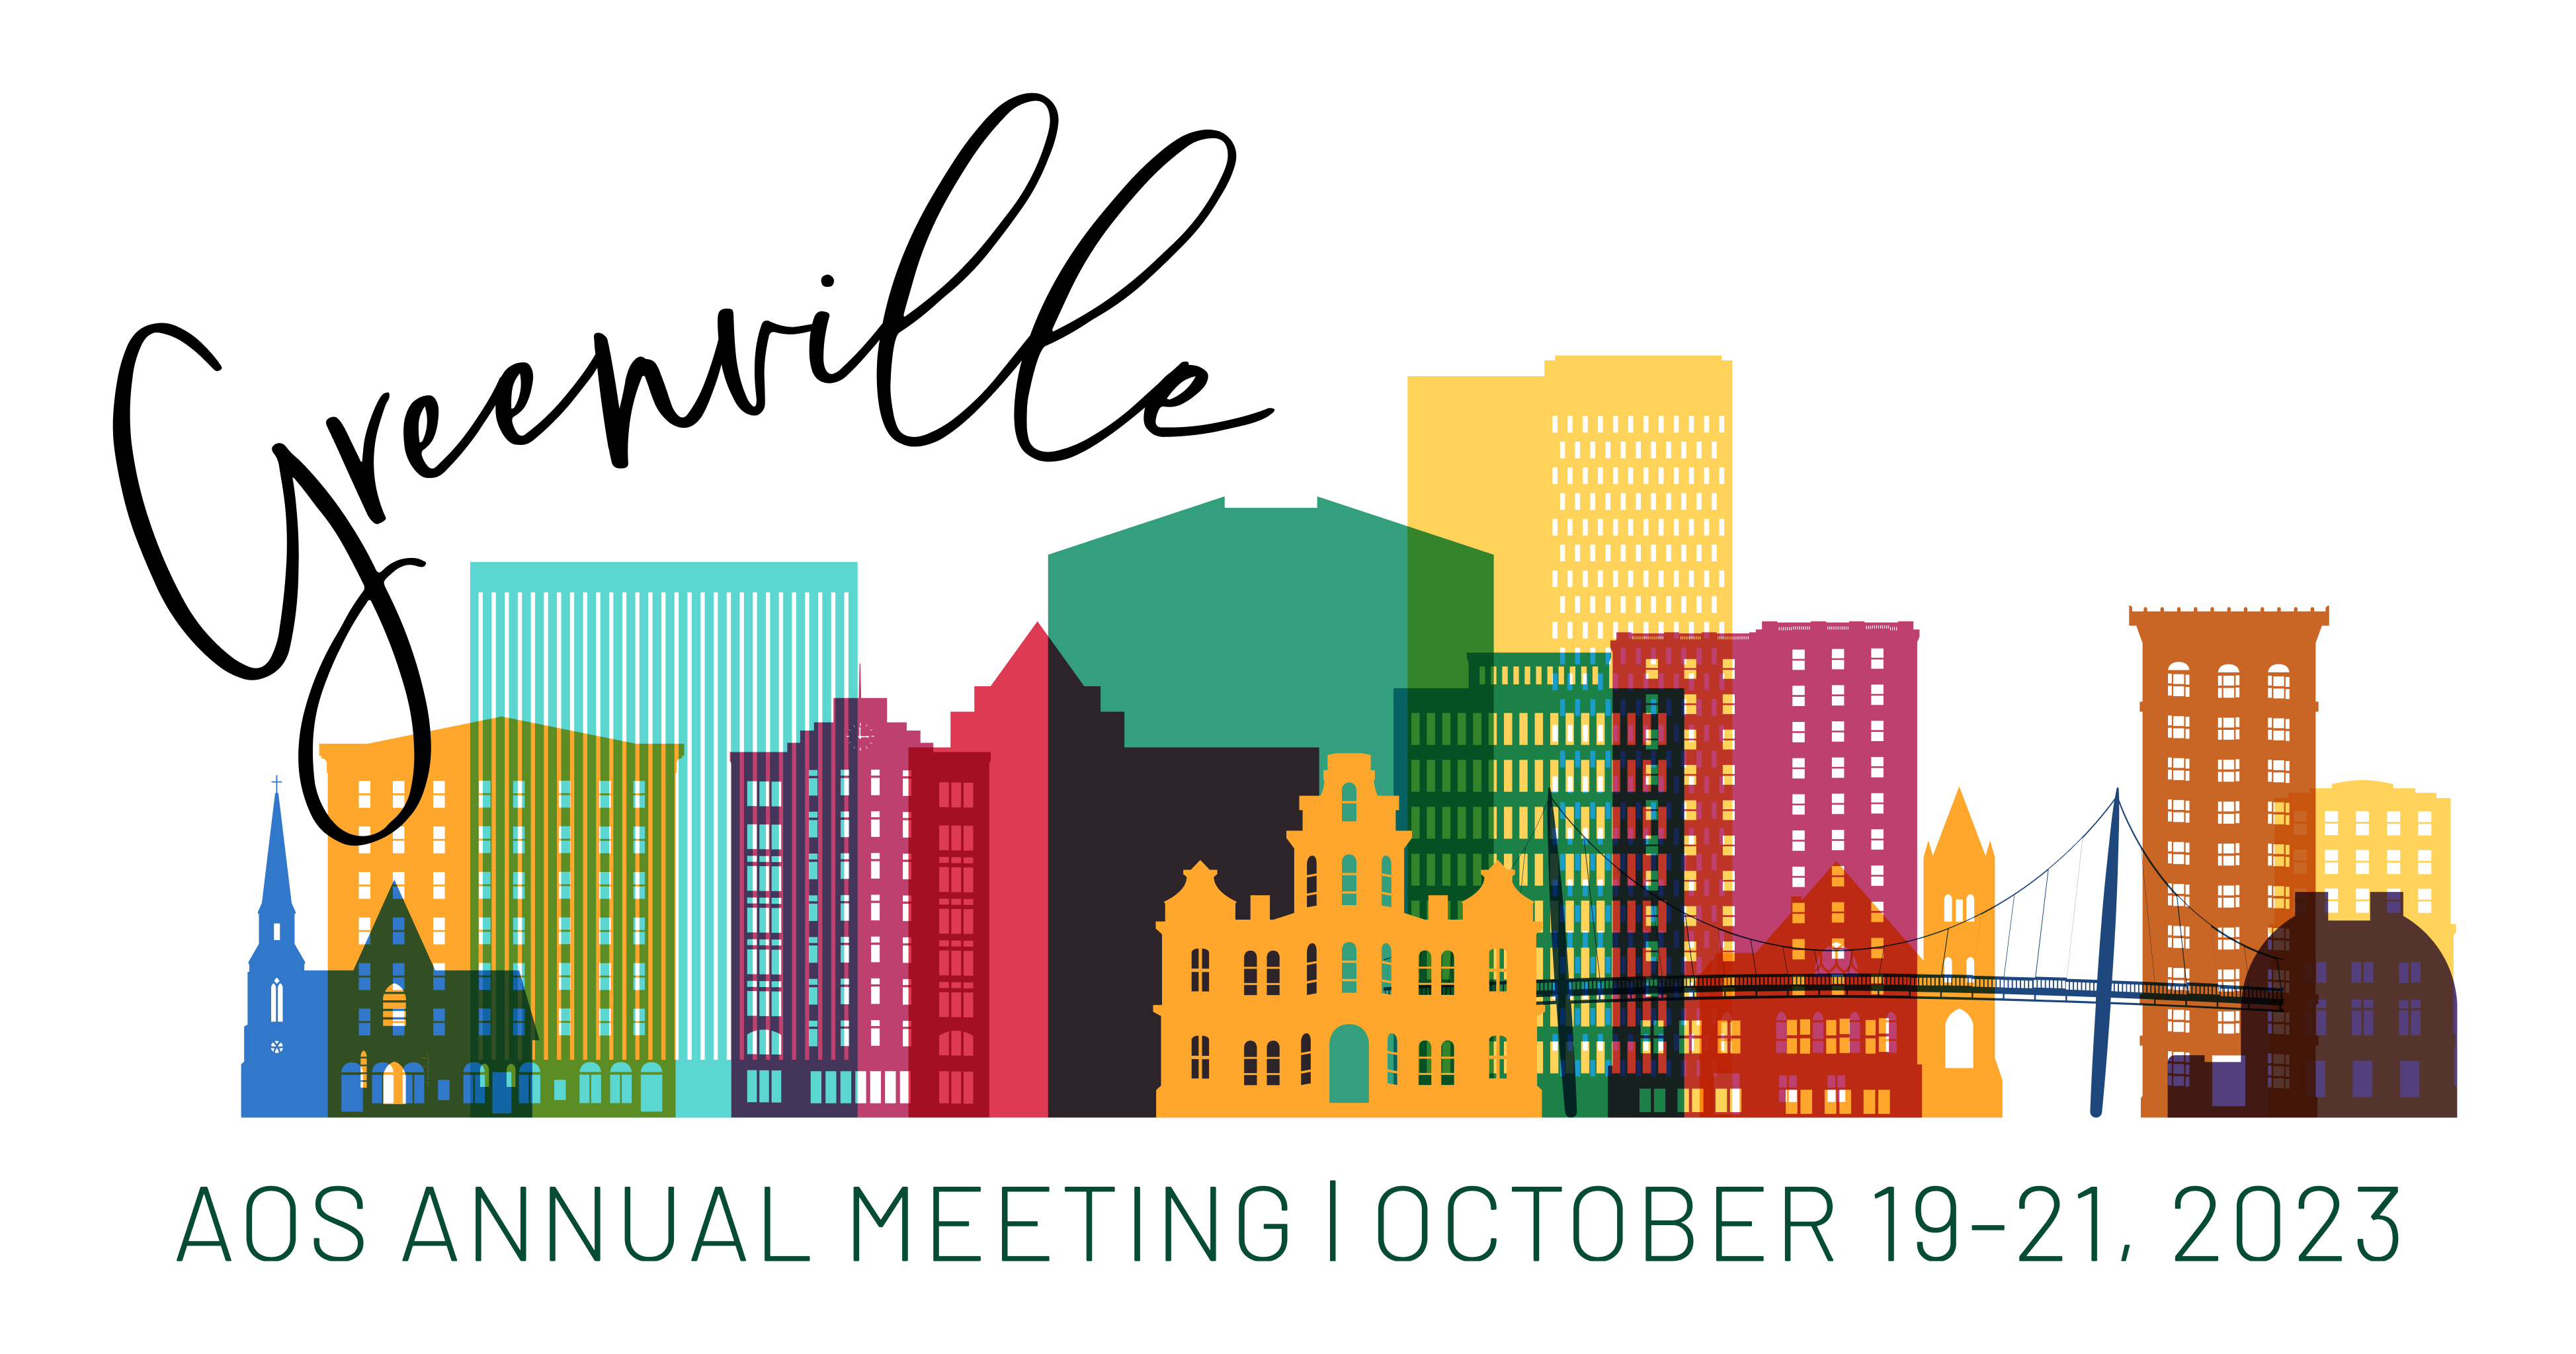 Greenville-AOS Annual Meeting Oct 19-21, 2023 infographic